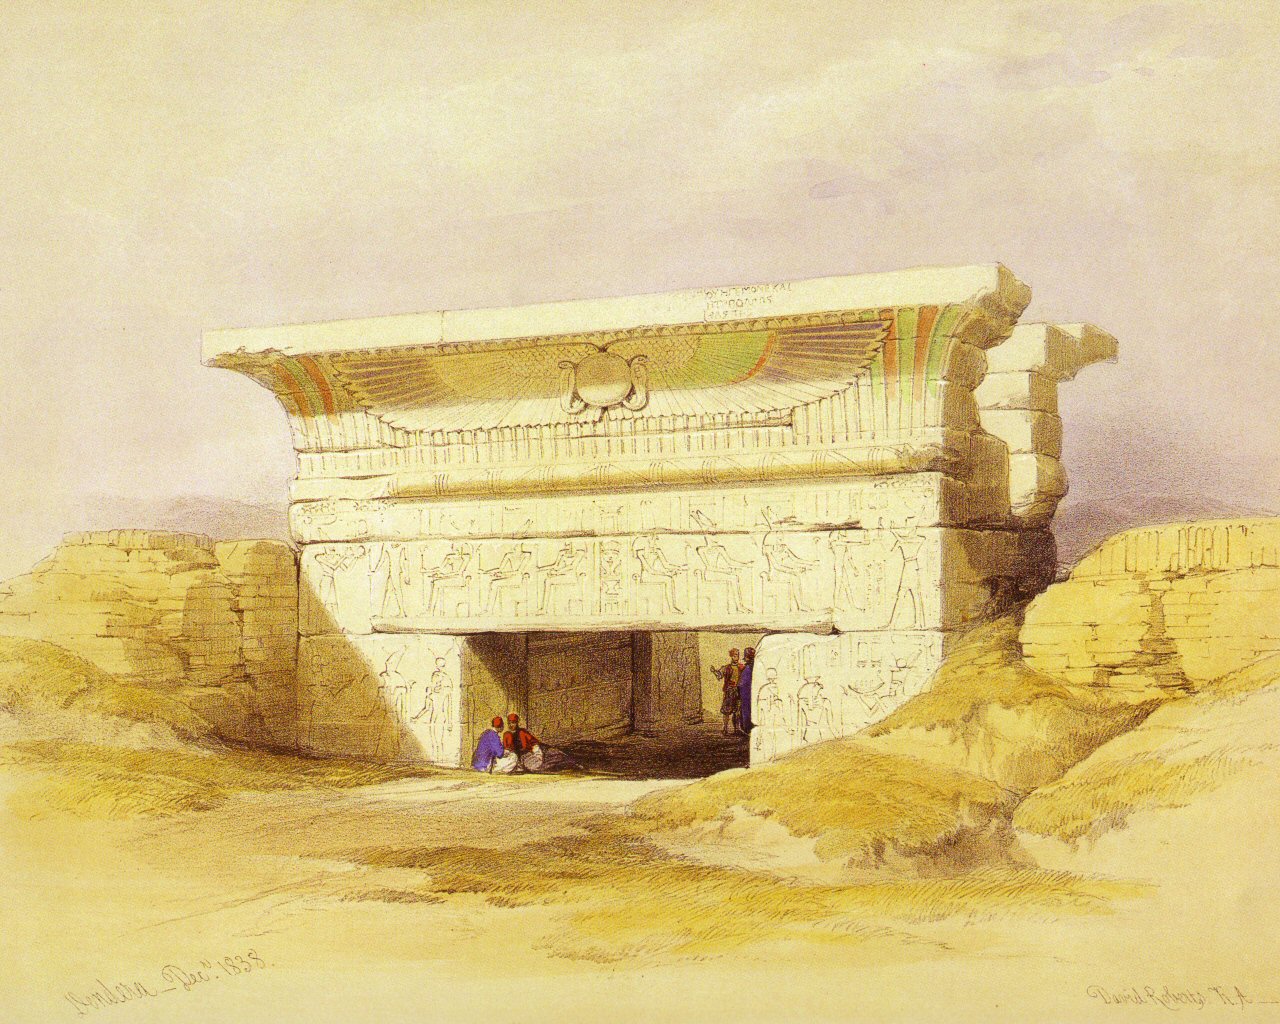 David_Roberts_09_The_Great_Entry_Portal_To_The_Sanctuary_Of_Dendera_1280x1024.jpg